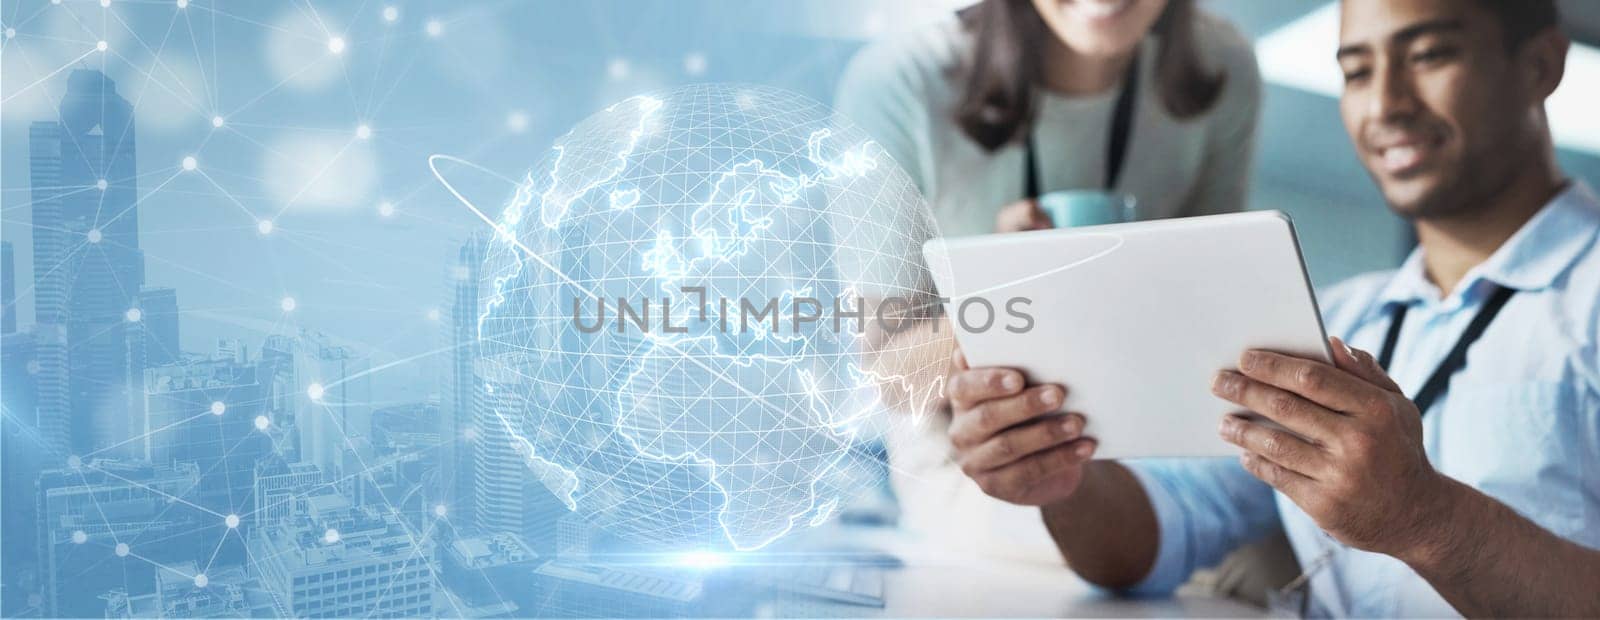 Tablet, overlay or team with digital marketing research helping, talking or networking online or internet. Global hologram, woman or happy agents in communication or conversation for tech sales data.